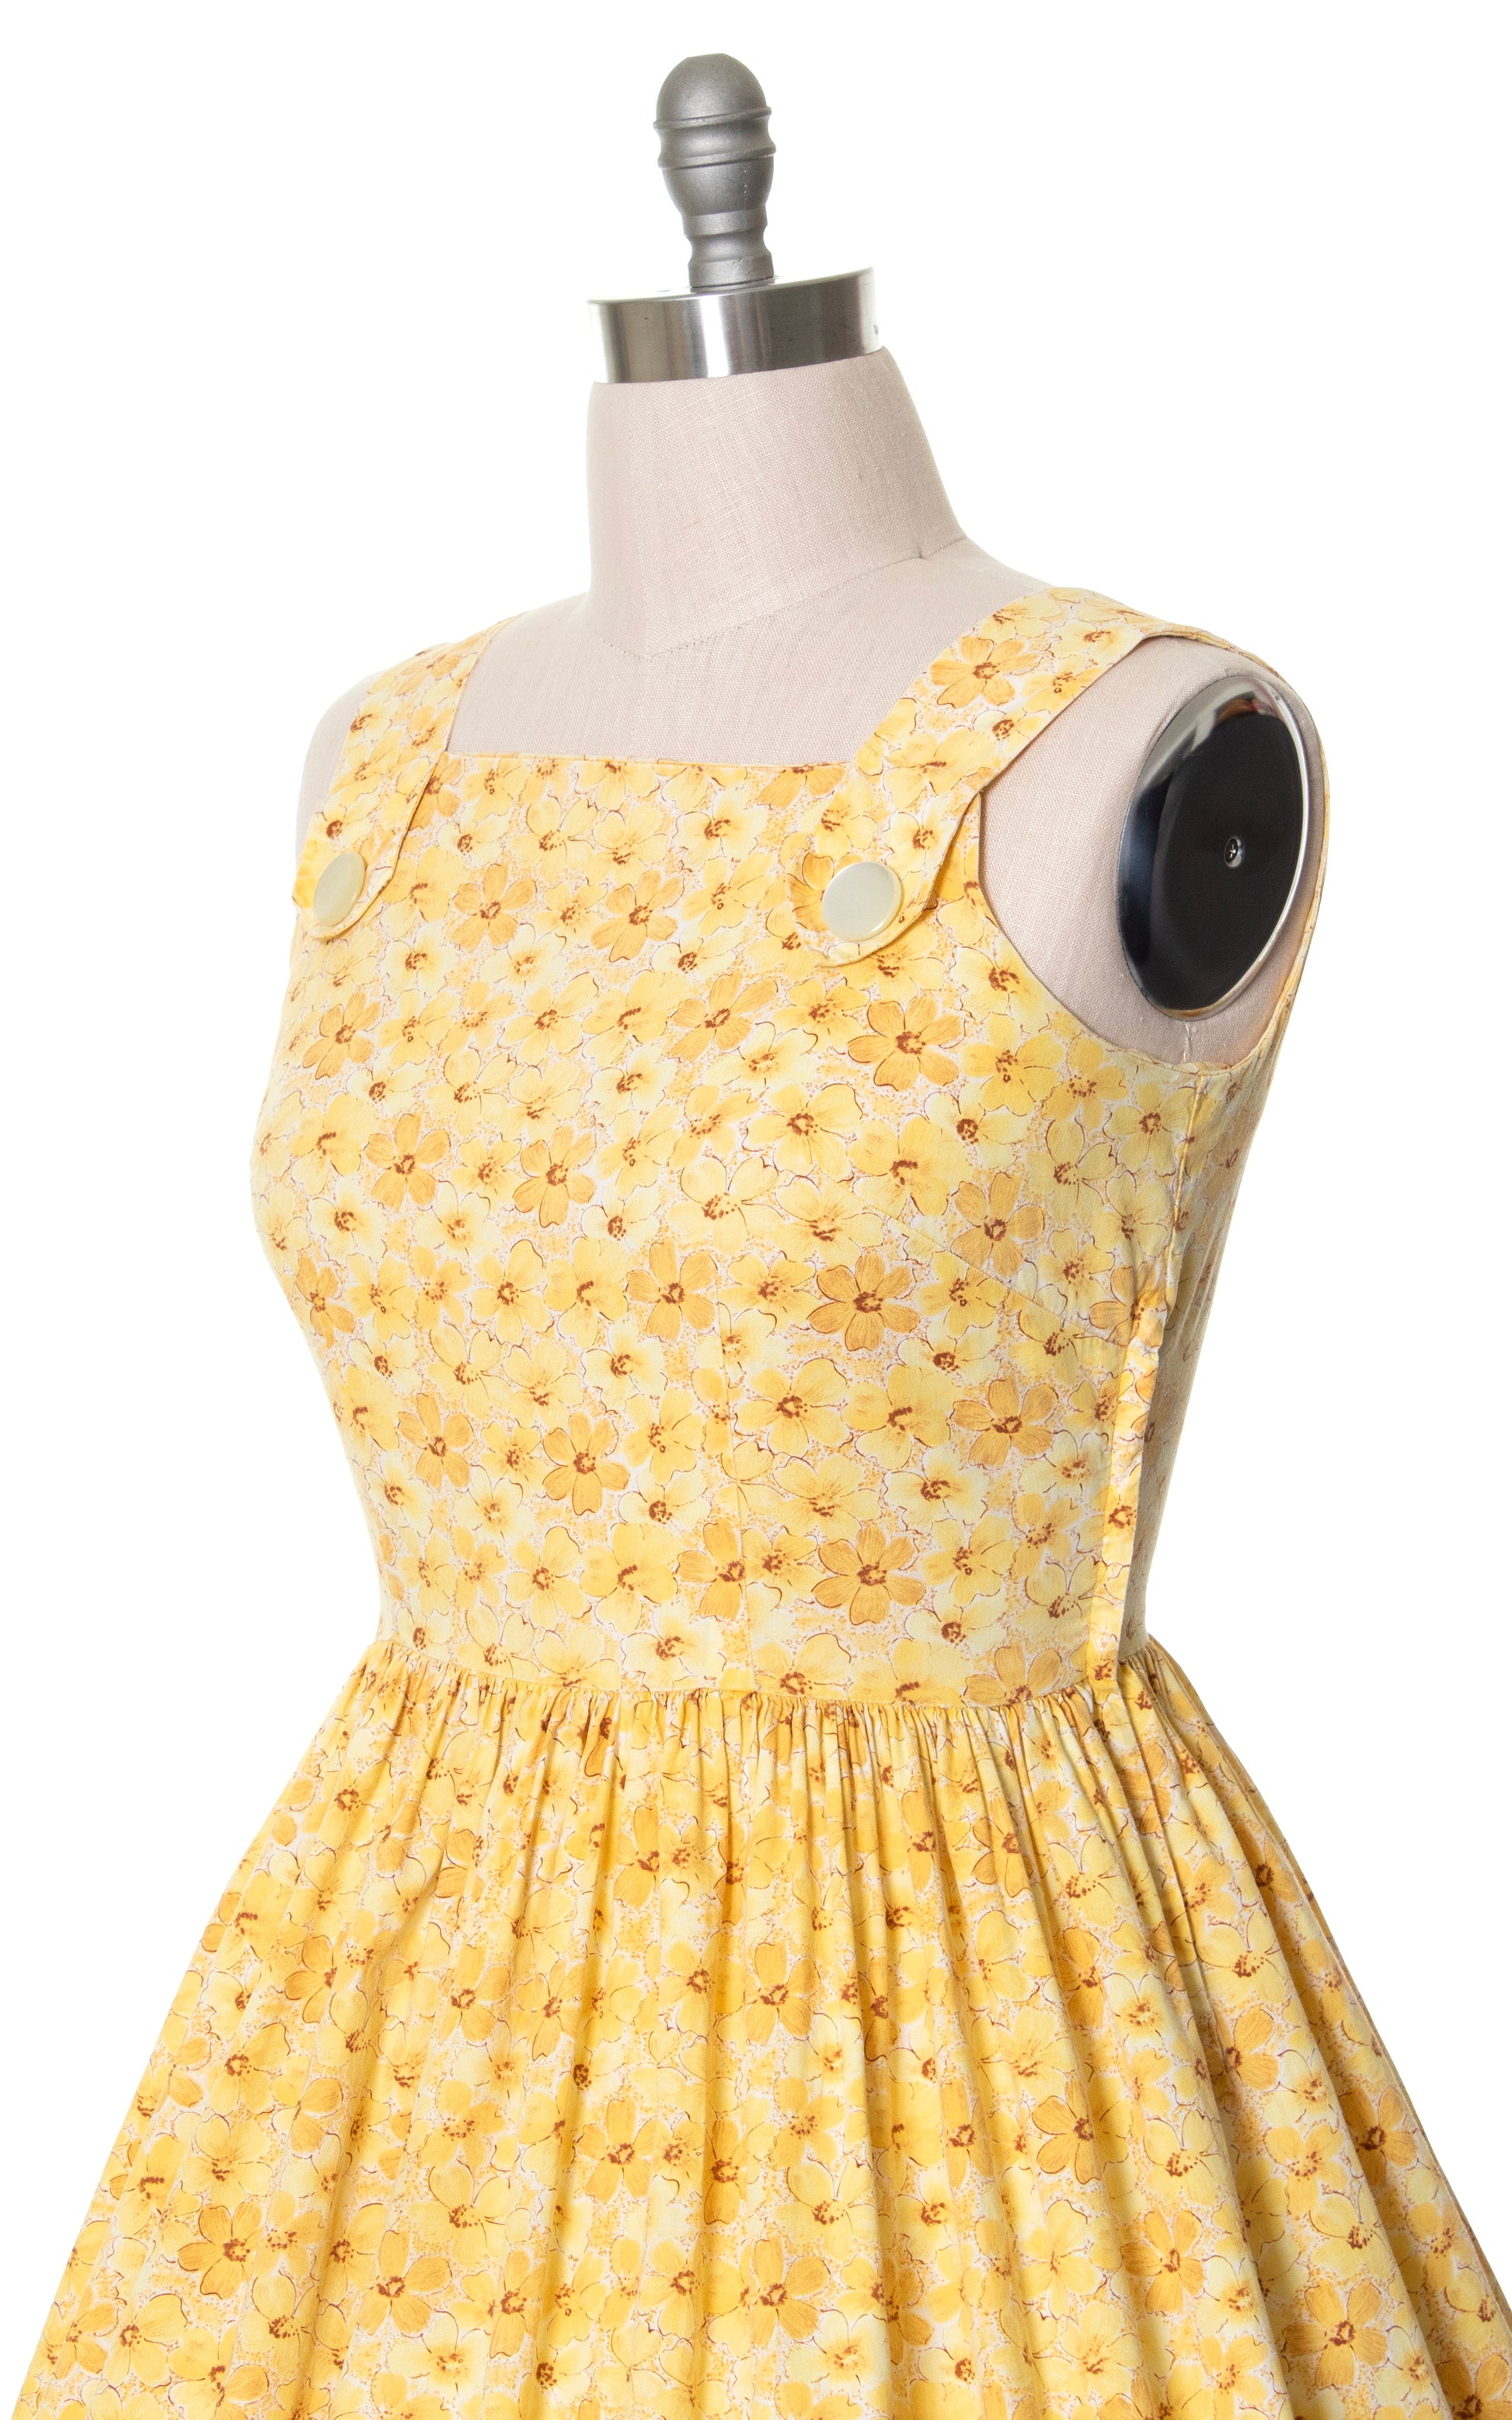 Vintage 50s 1950s Yellow Floral Cotton Sundress Fit and Flare Day Dress BirthdayLifeVintage